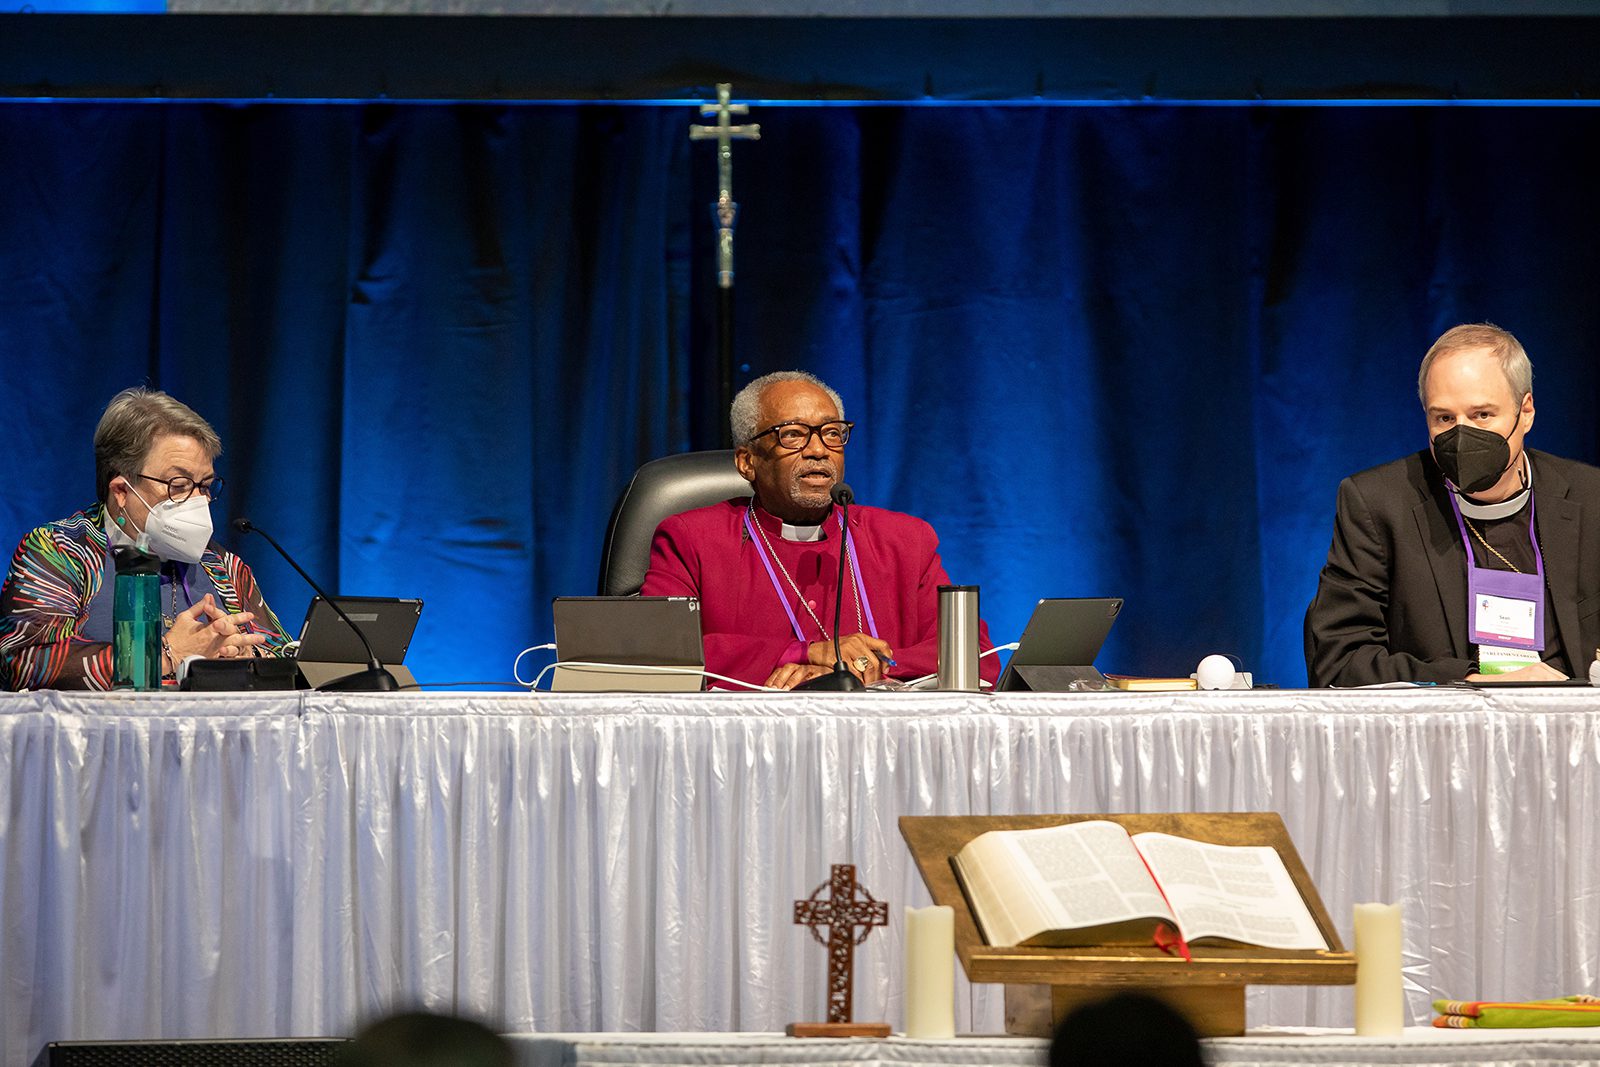 Bishop Michael Curry presides over the House of Bishops during the Episcopal Church General Convention, July 9, 2022, in Baltimore, Maryland. Photo by Randall Gornowich